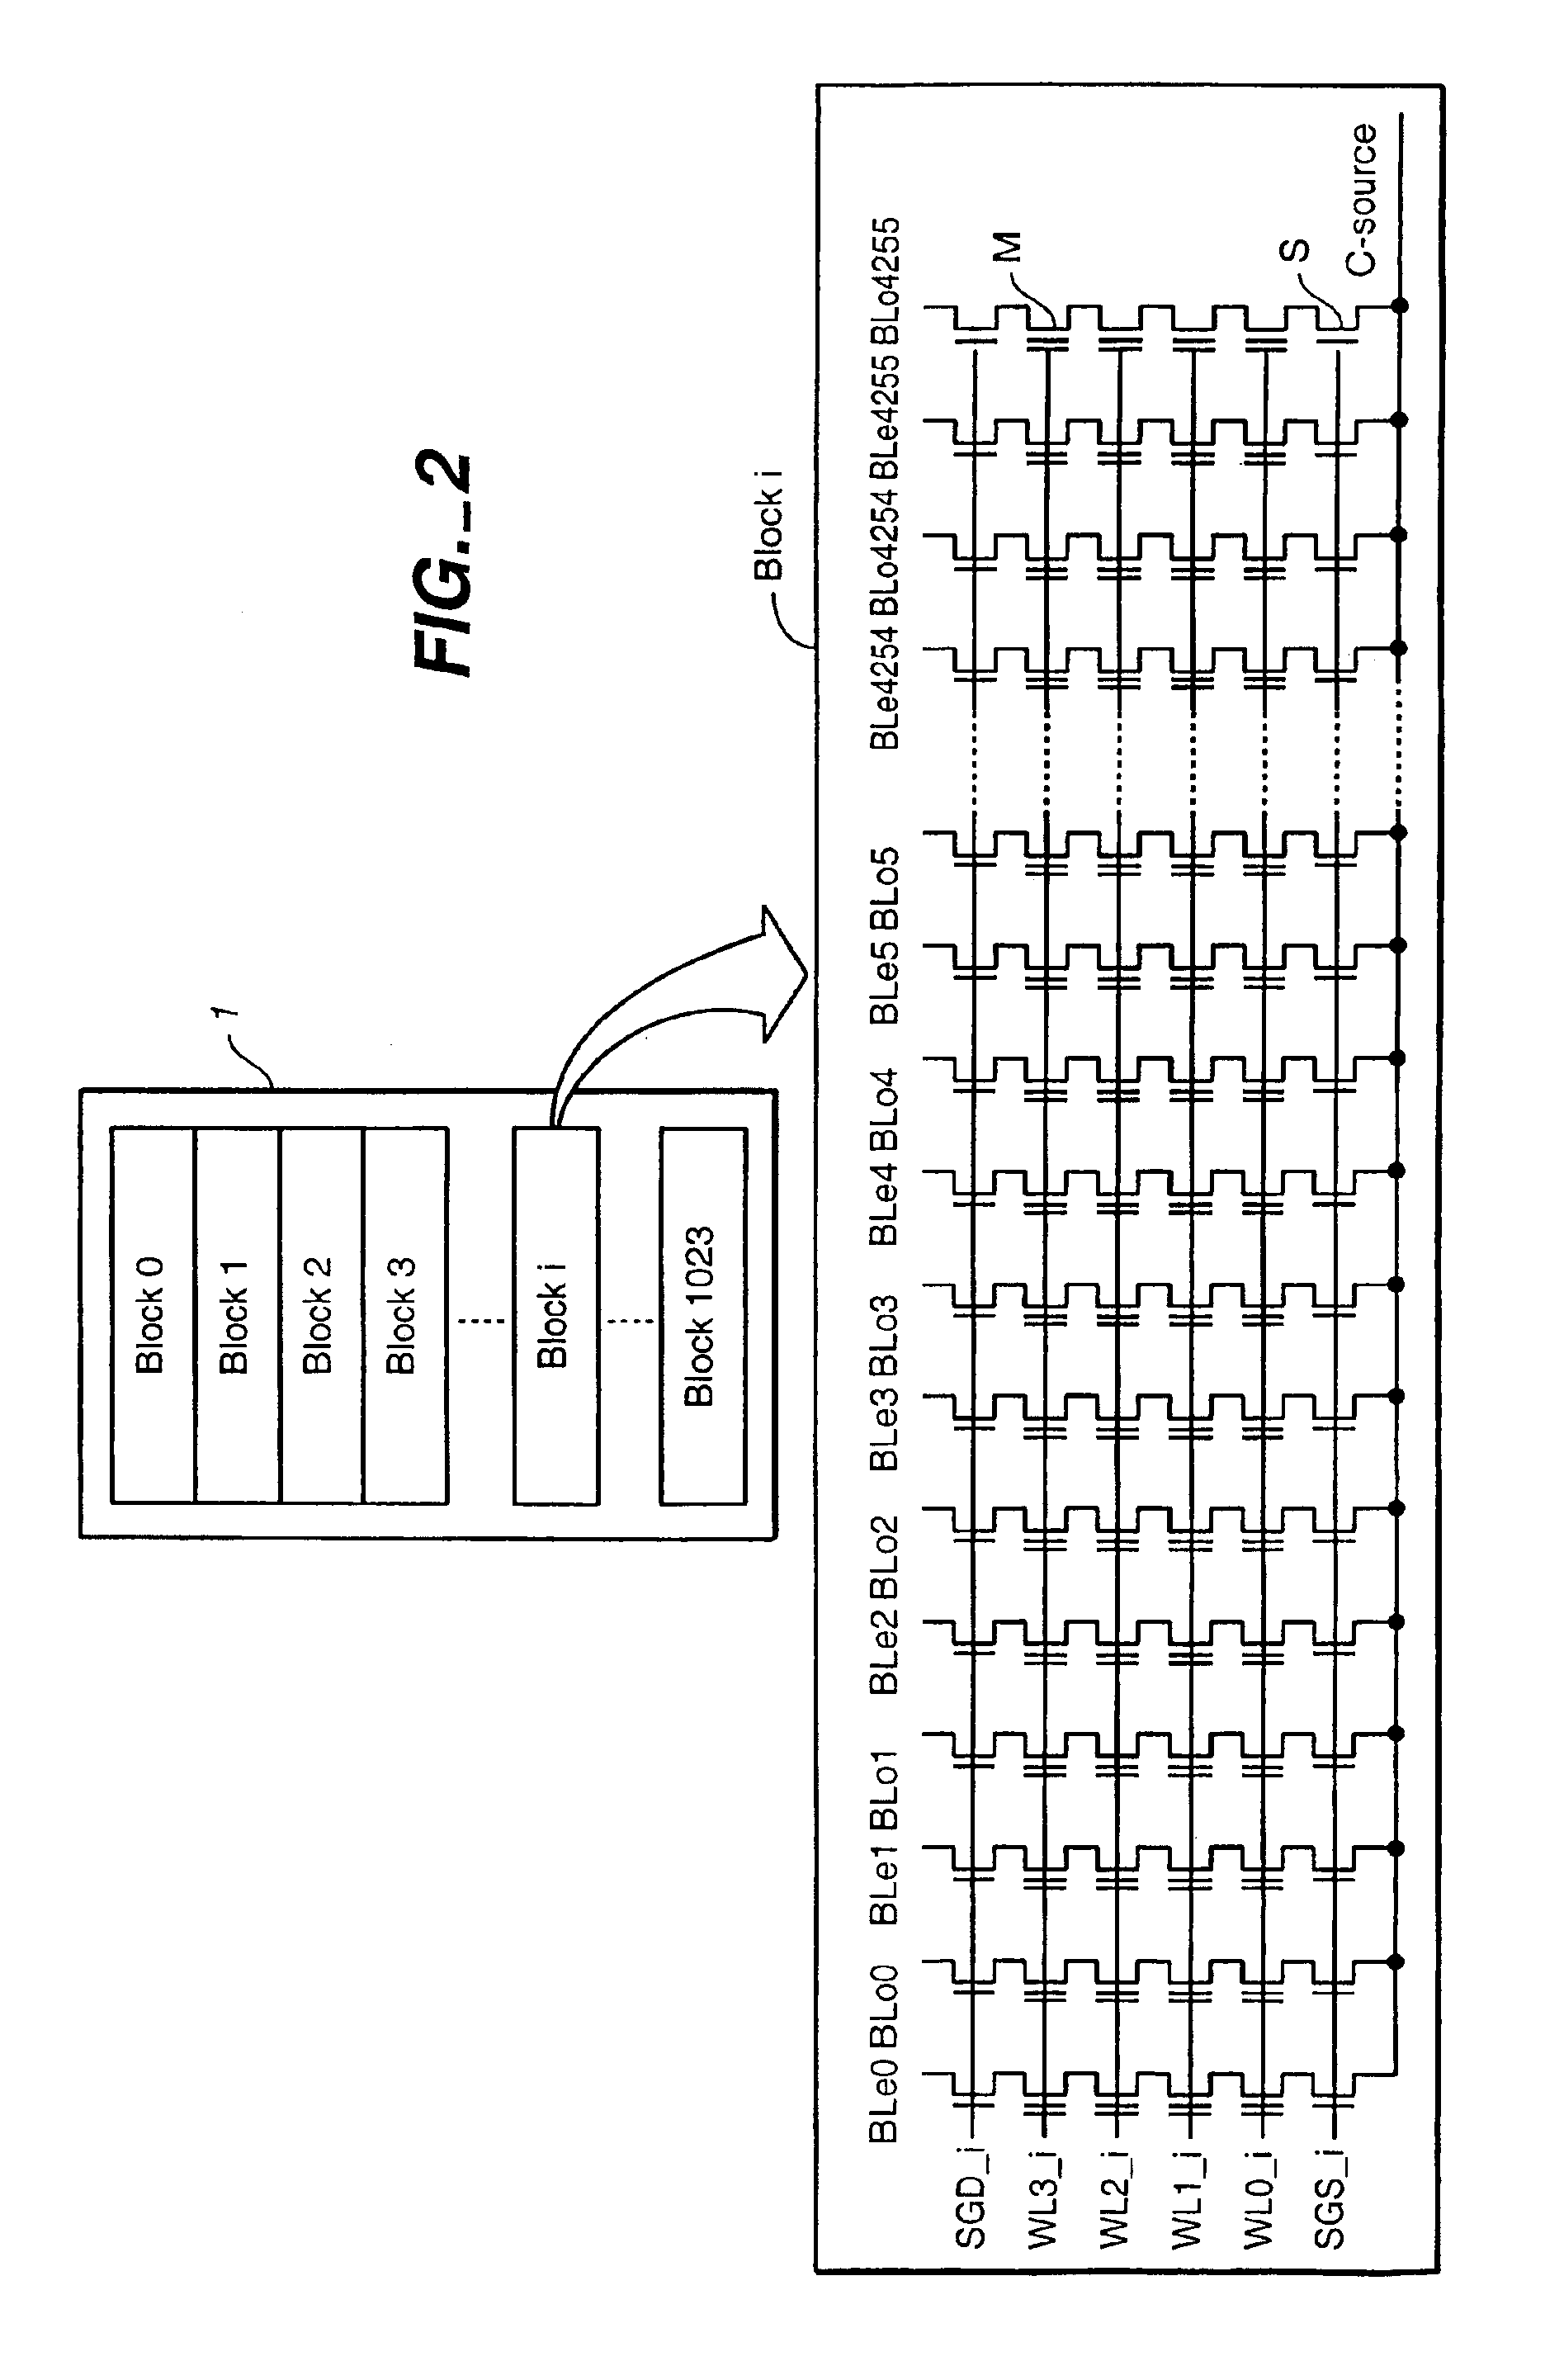 Selective operation of a multi-state non-volatile memory system in a binary mode